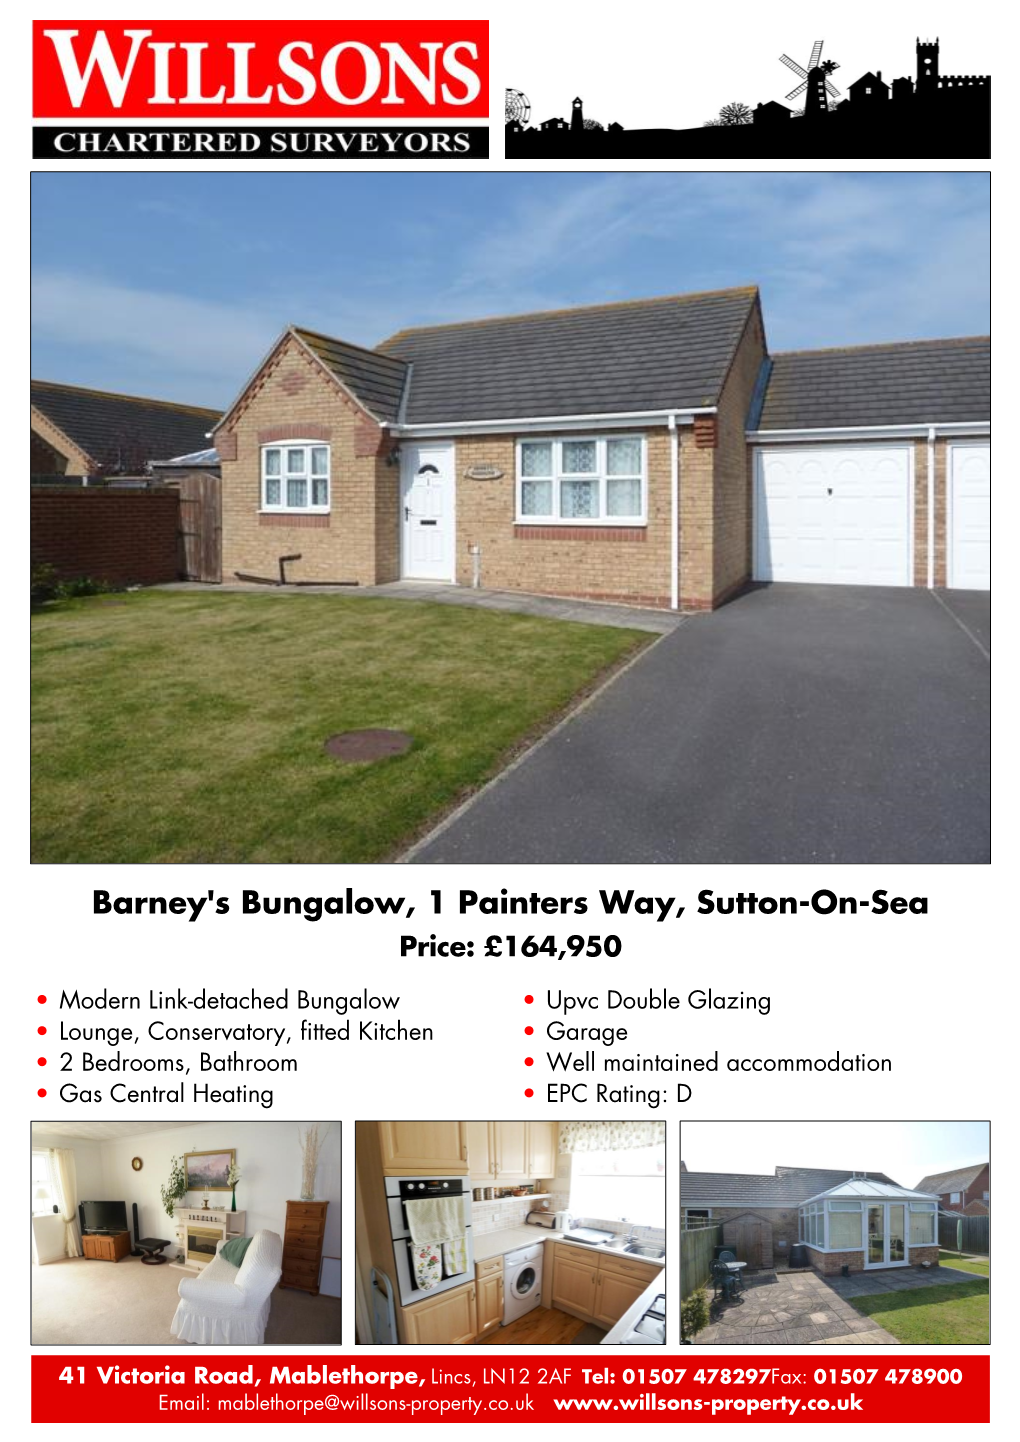 Barney's Bungalow, 1 Painters Way, Sutton-On-Sea Mablethorpe